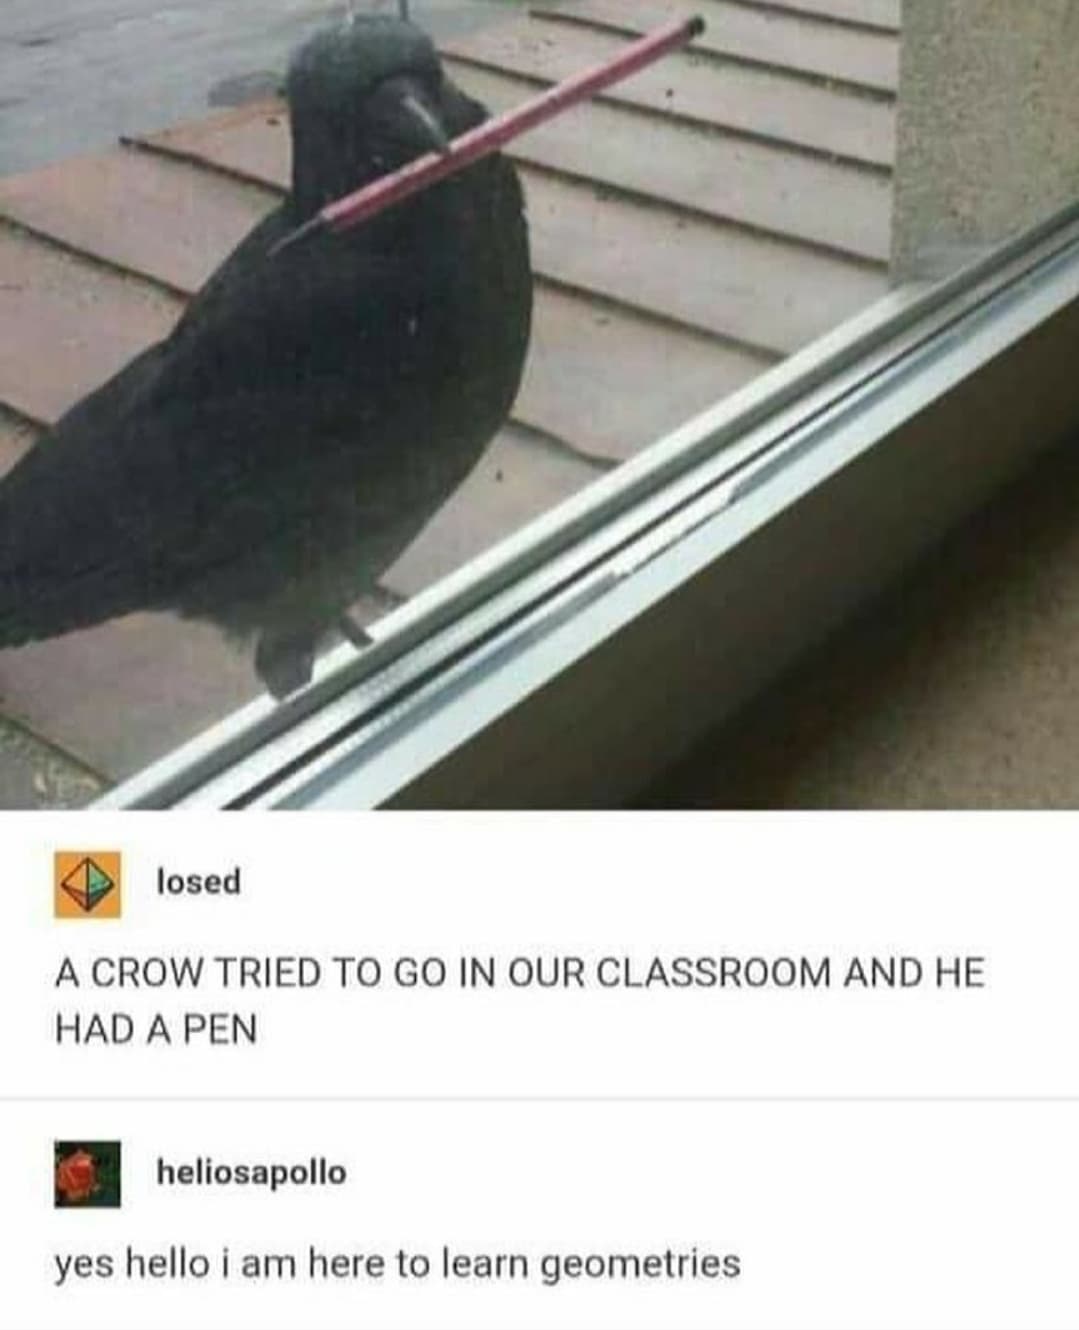 fauna - losed A Crow Tried To Go In Our Classroom And He Had A Pen heliosapollo yes hello i am here to learn geometries